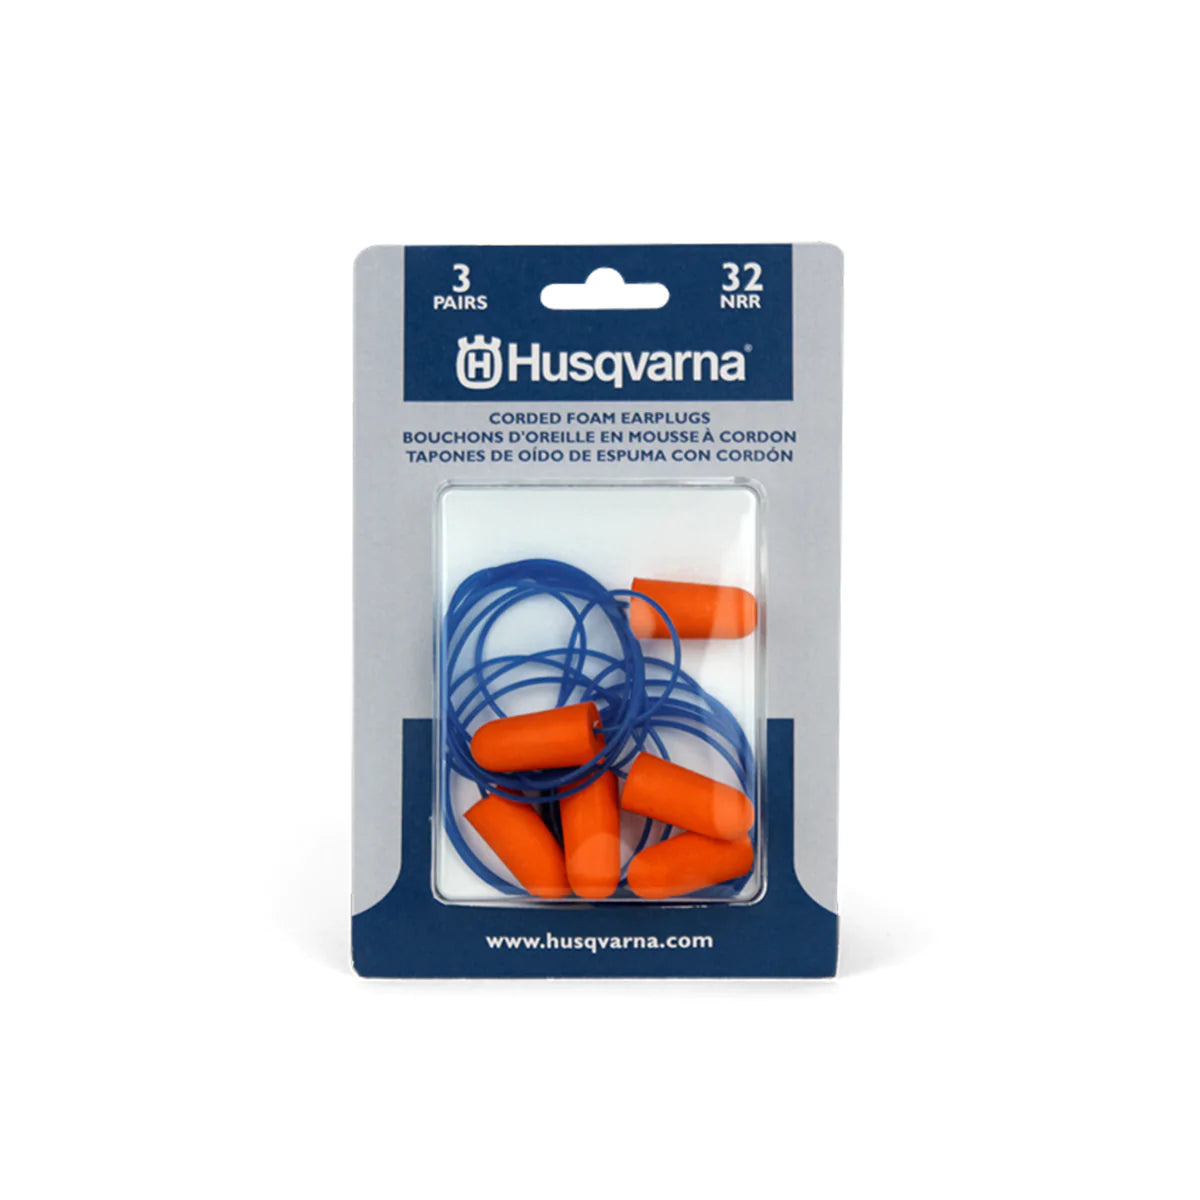 Husqvarna Ear Plugs 3 Pairs Corded EAP-CORD - Mowermerch More spare parts for all your power equipment needs available. From mower spare parts to all other power equipment spare parts we have them all. If your gardening equipment needs new spare parts, check us out!